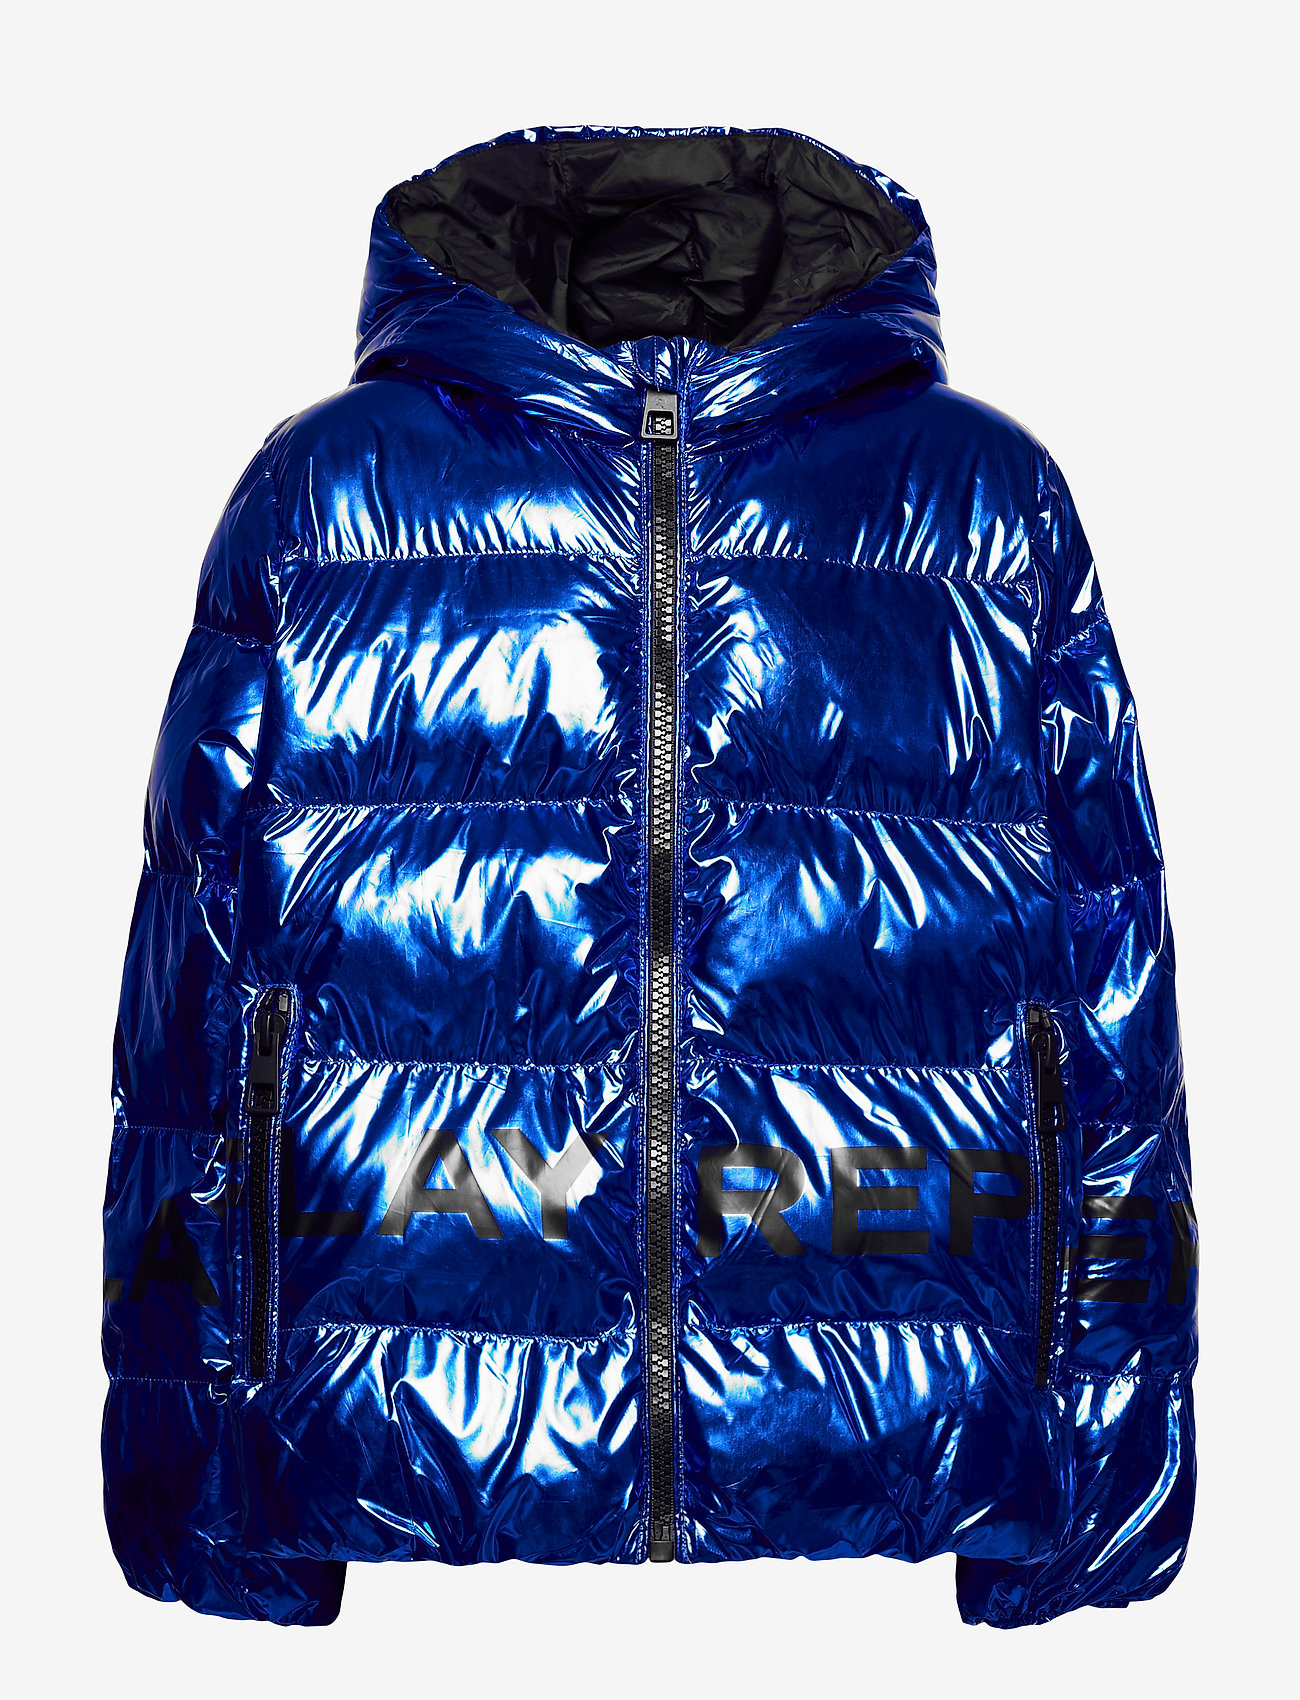 Replay Jacket Back To School - Puffer & Padded | Boozt.com